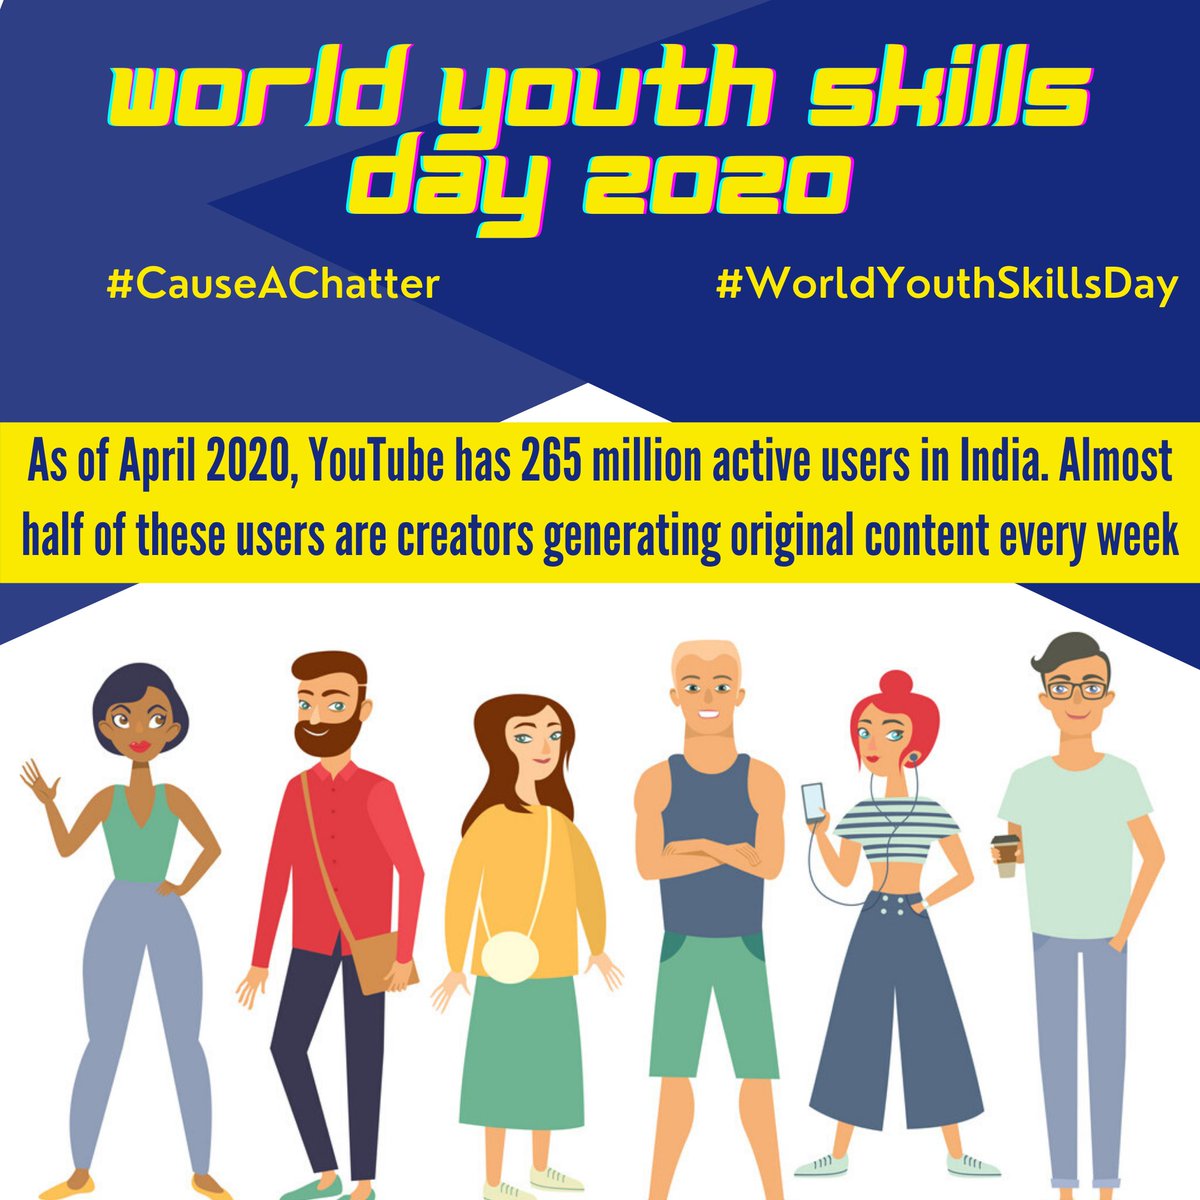 The internet provides an audience that has access to internet channels. Creators garner attention that pushes them to work and create more. The only thing needed is a nudge in the right direction. This is where you and I come into the picture.  #WorldYouthSkillsDay  #CauseAChatter